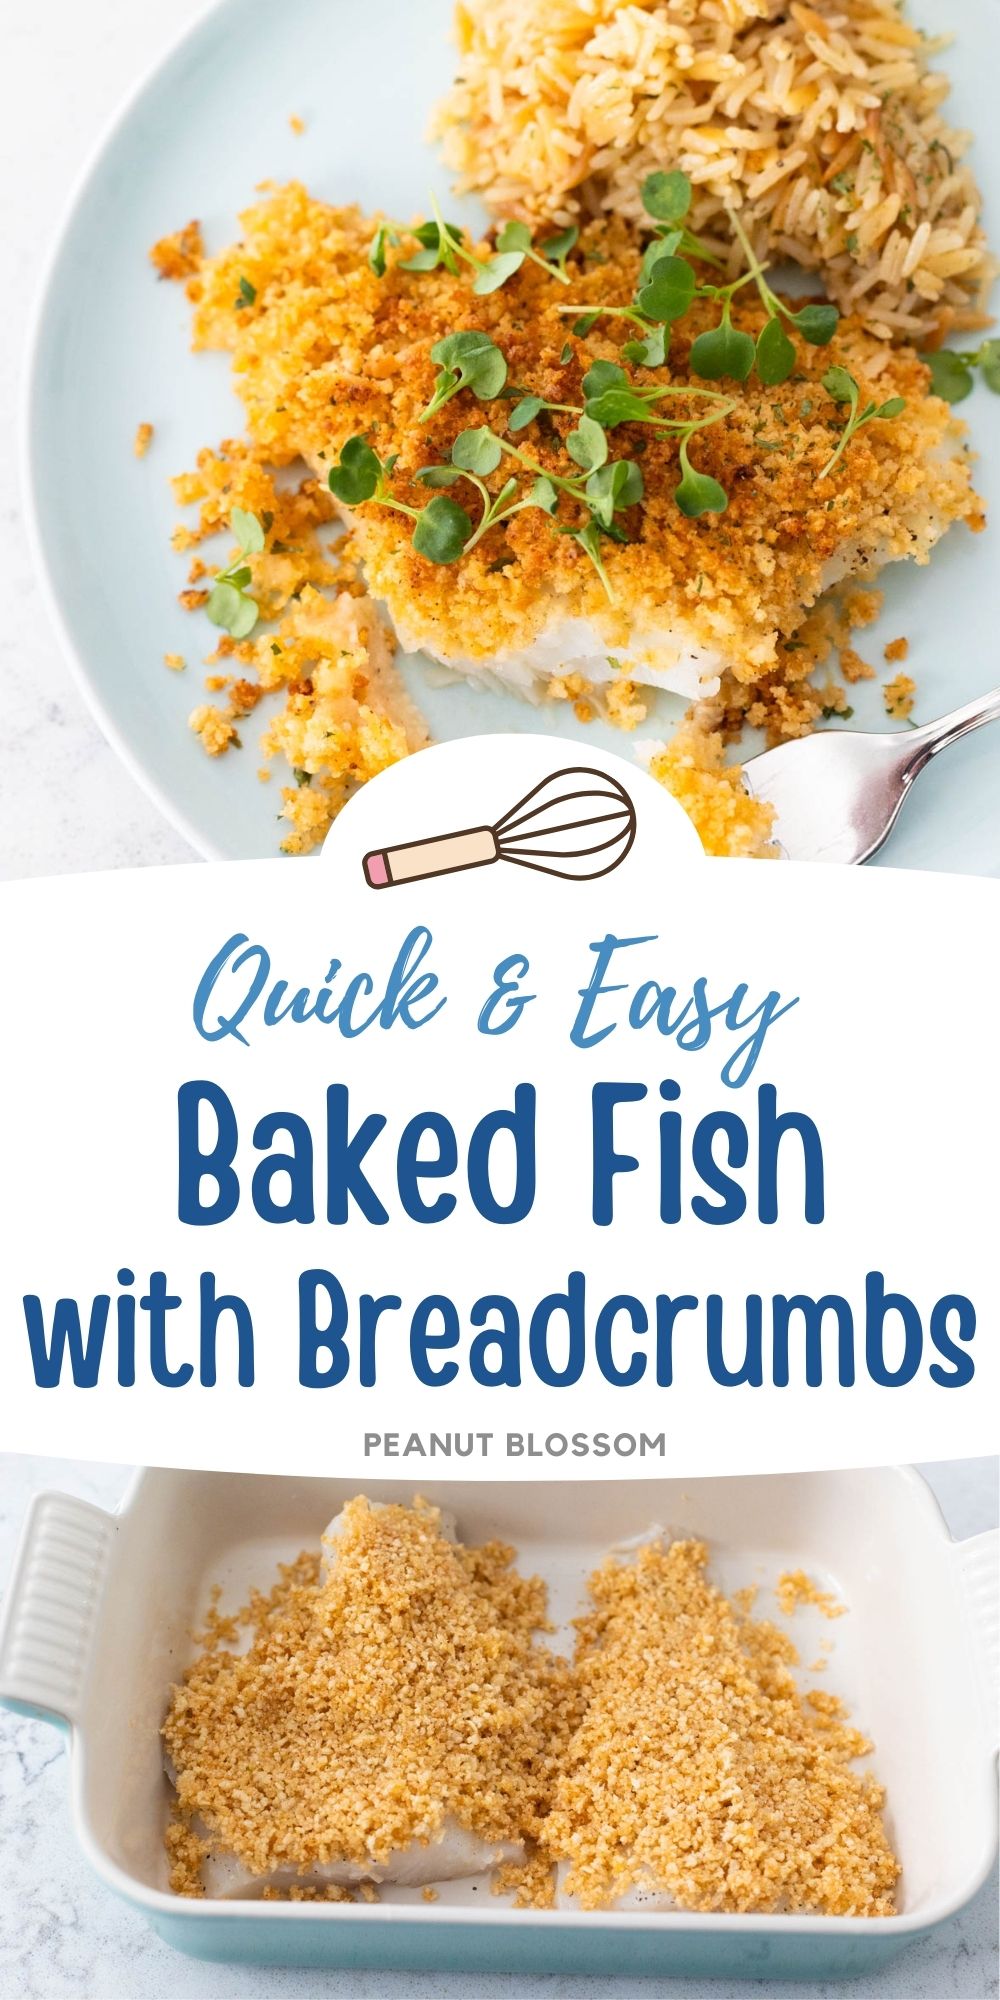 The photo collage shows the baked fish with breadcrumbs on top on a blue plate next to the fish in a baking dish.